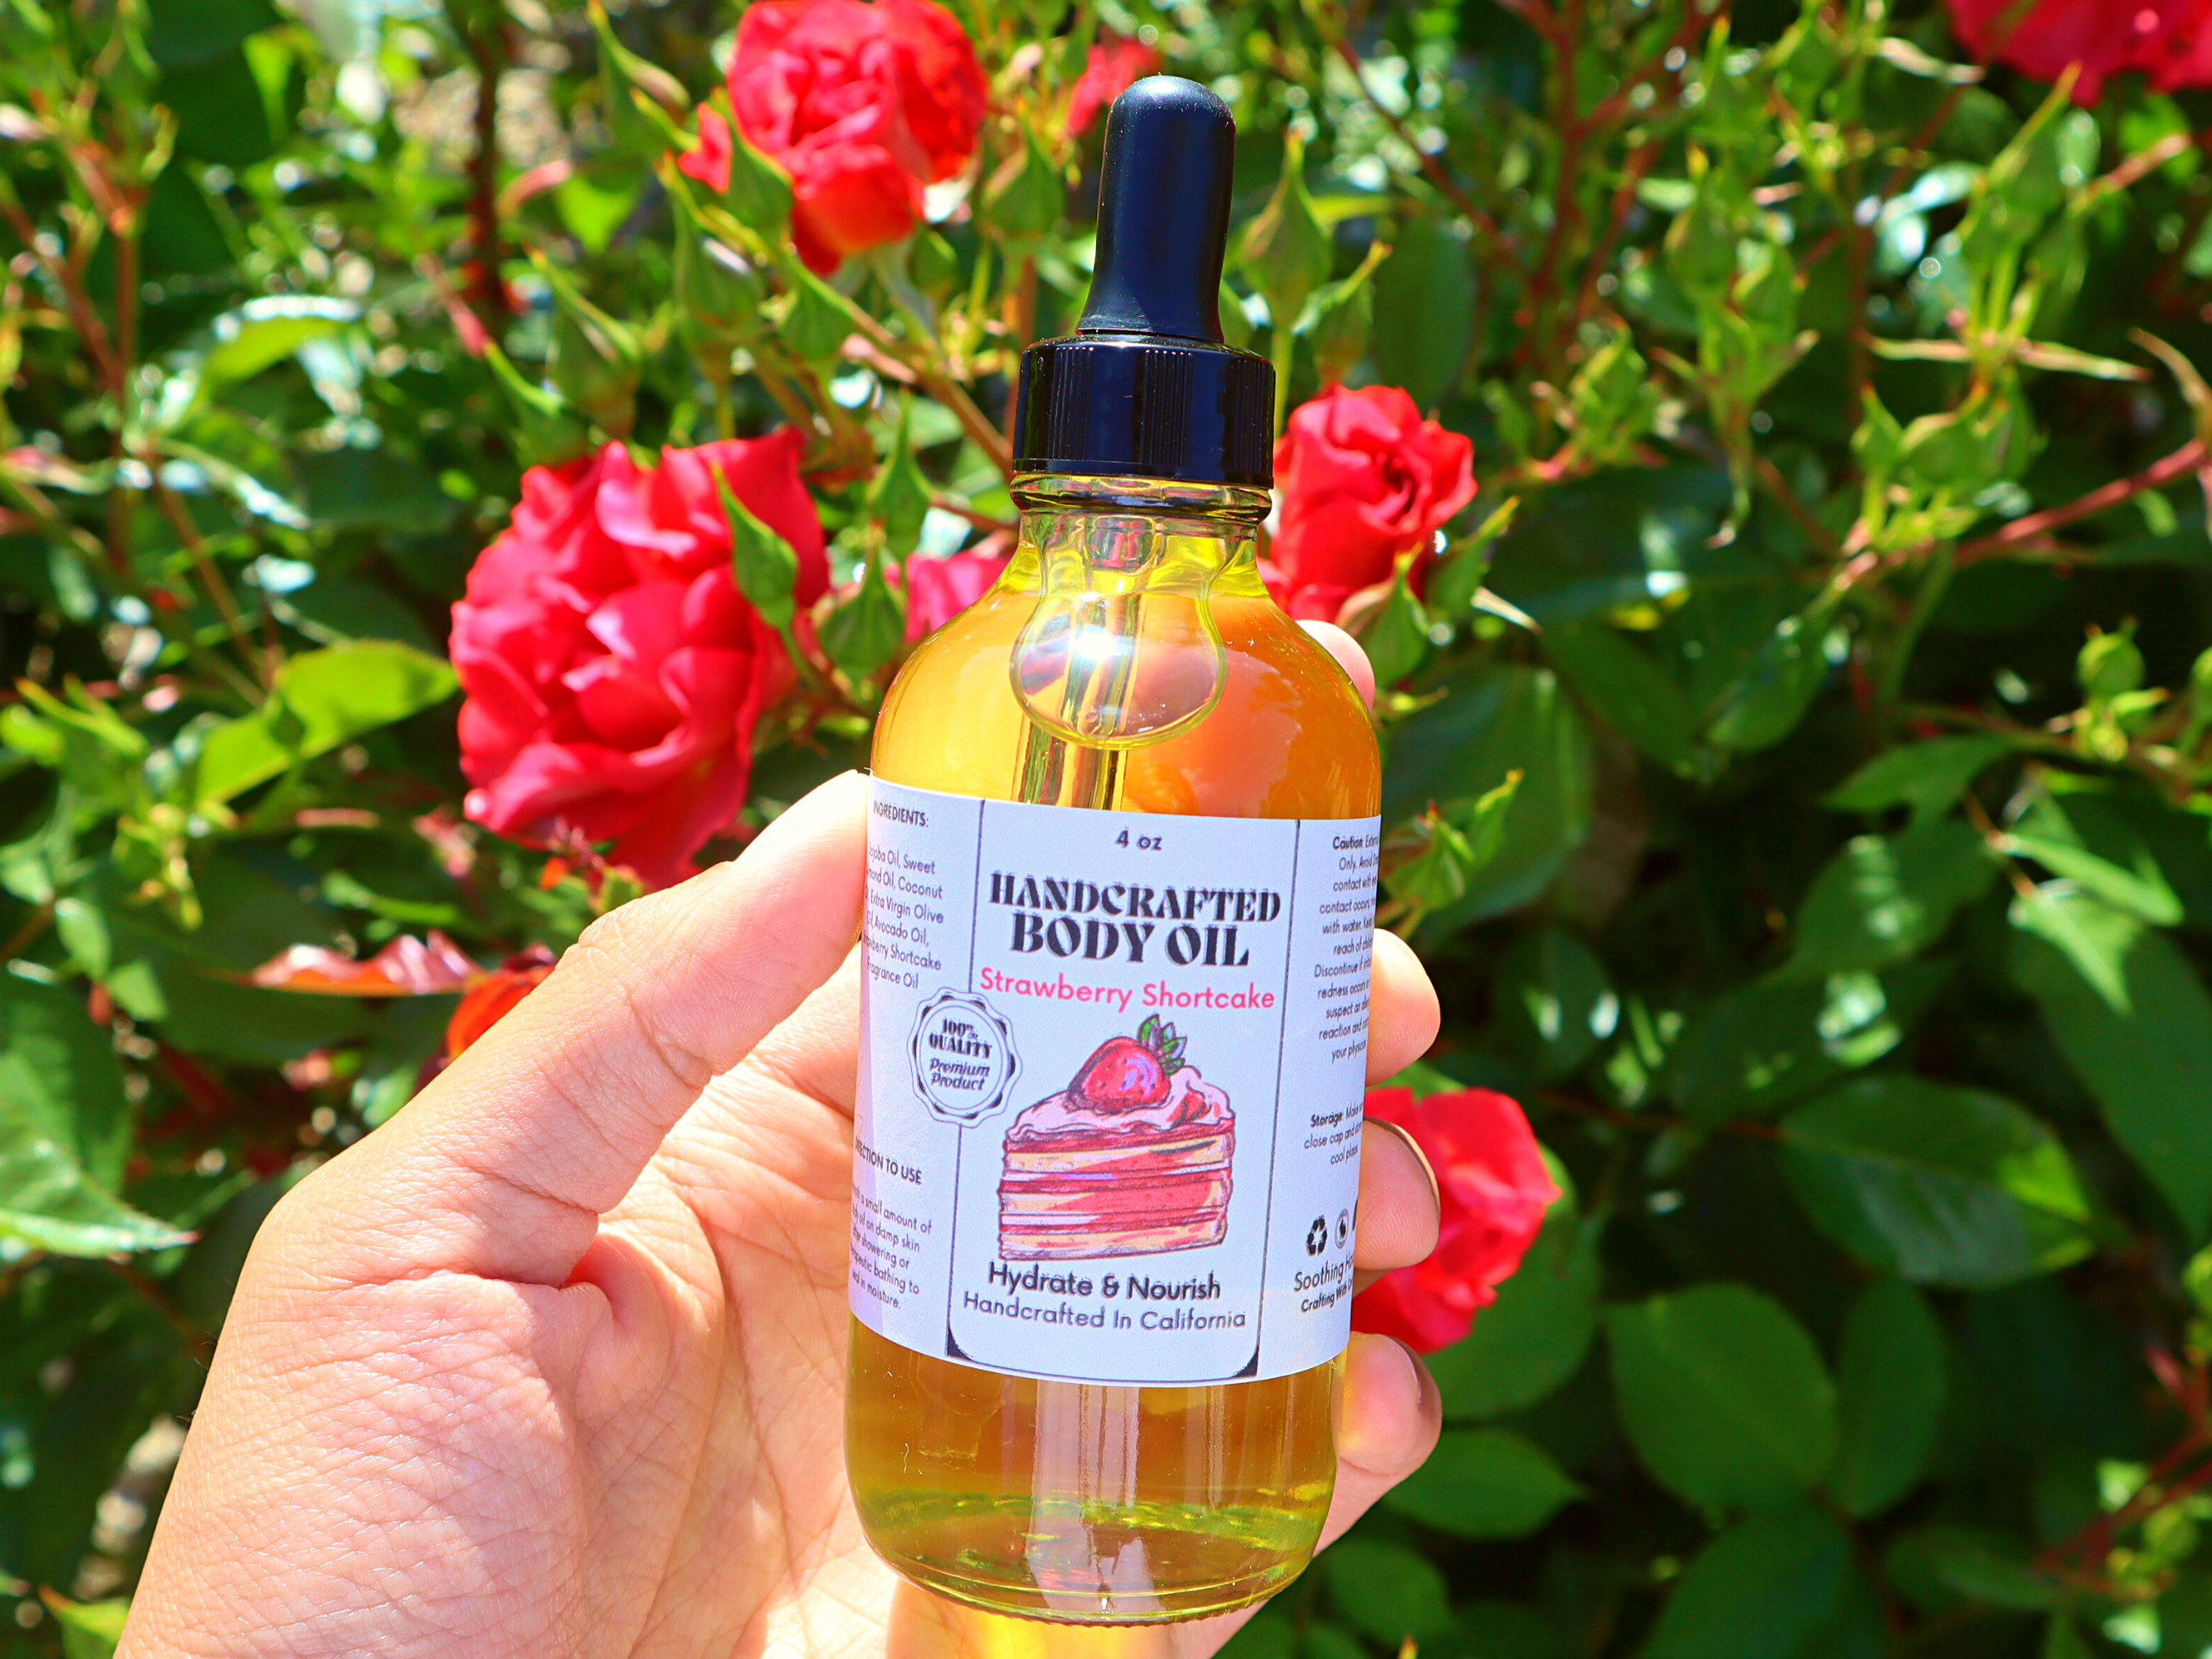 Wait, what's this? Strawberry Shortcake Body Oil? Experience the